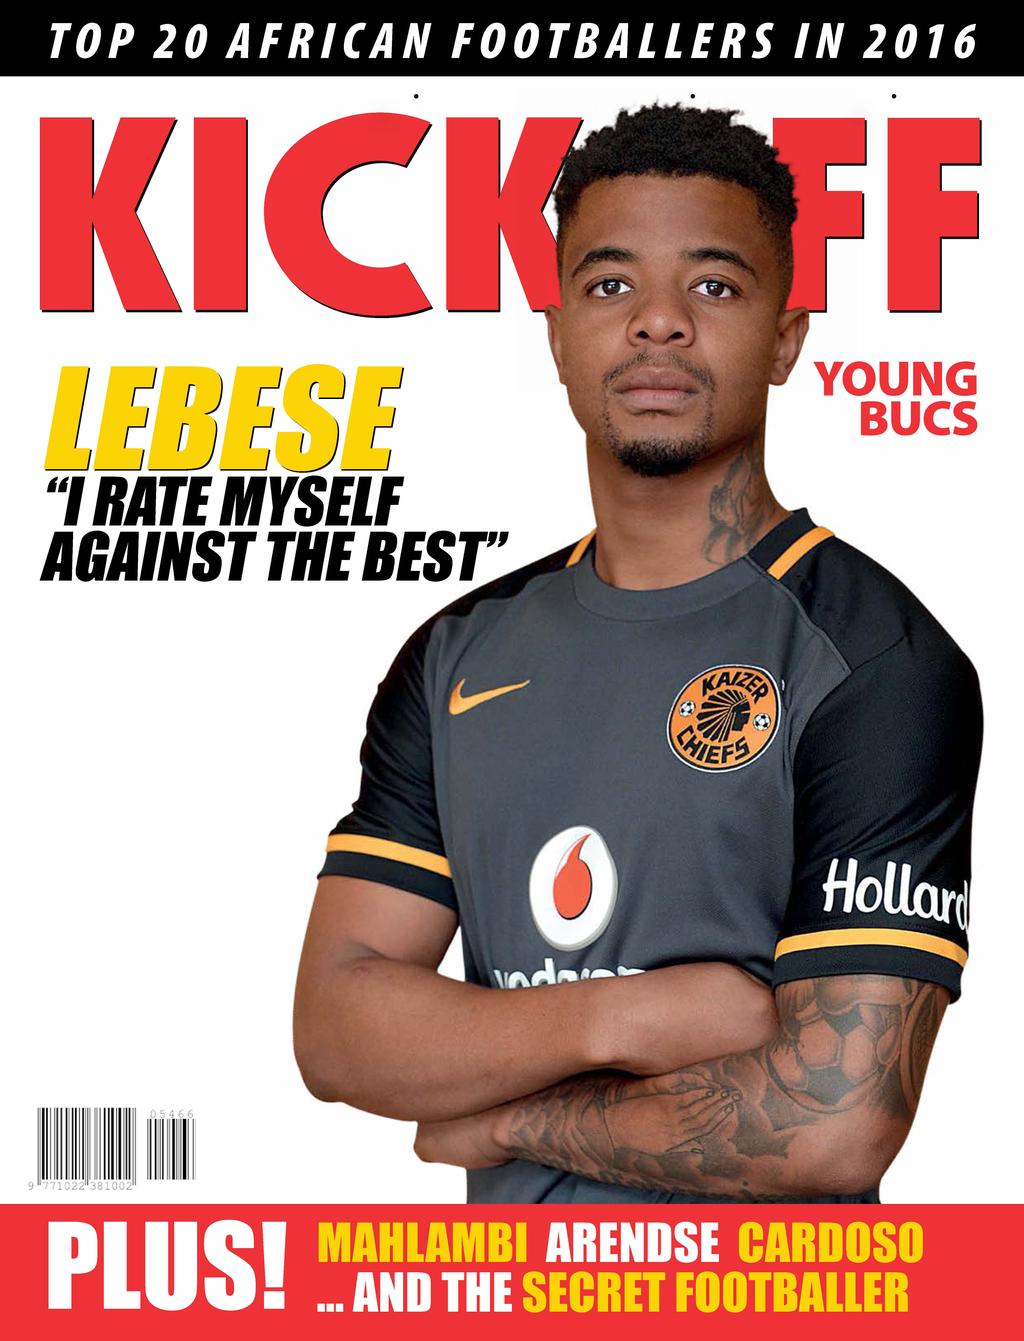 February 2016 ISSUE NUMBER 466 R15 00 (R1.84 VAT INCL.) OTHER COUNTRIES R13 16 (TAX EXCL.) NAMIBIA N$15 00 (TAX INCL.) 22 YEARS OF SOCCER AT ITS BEST!